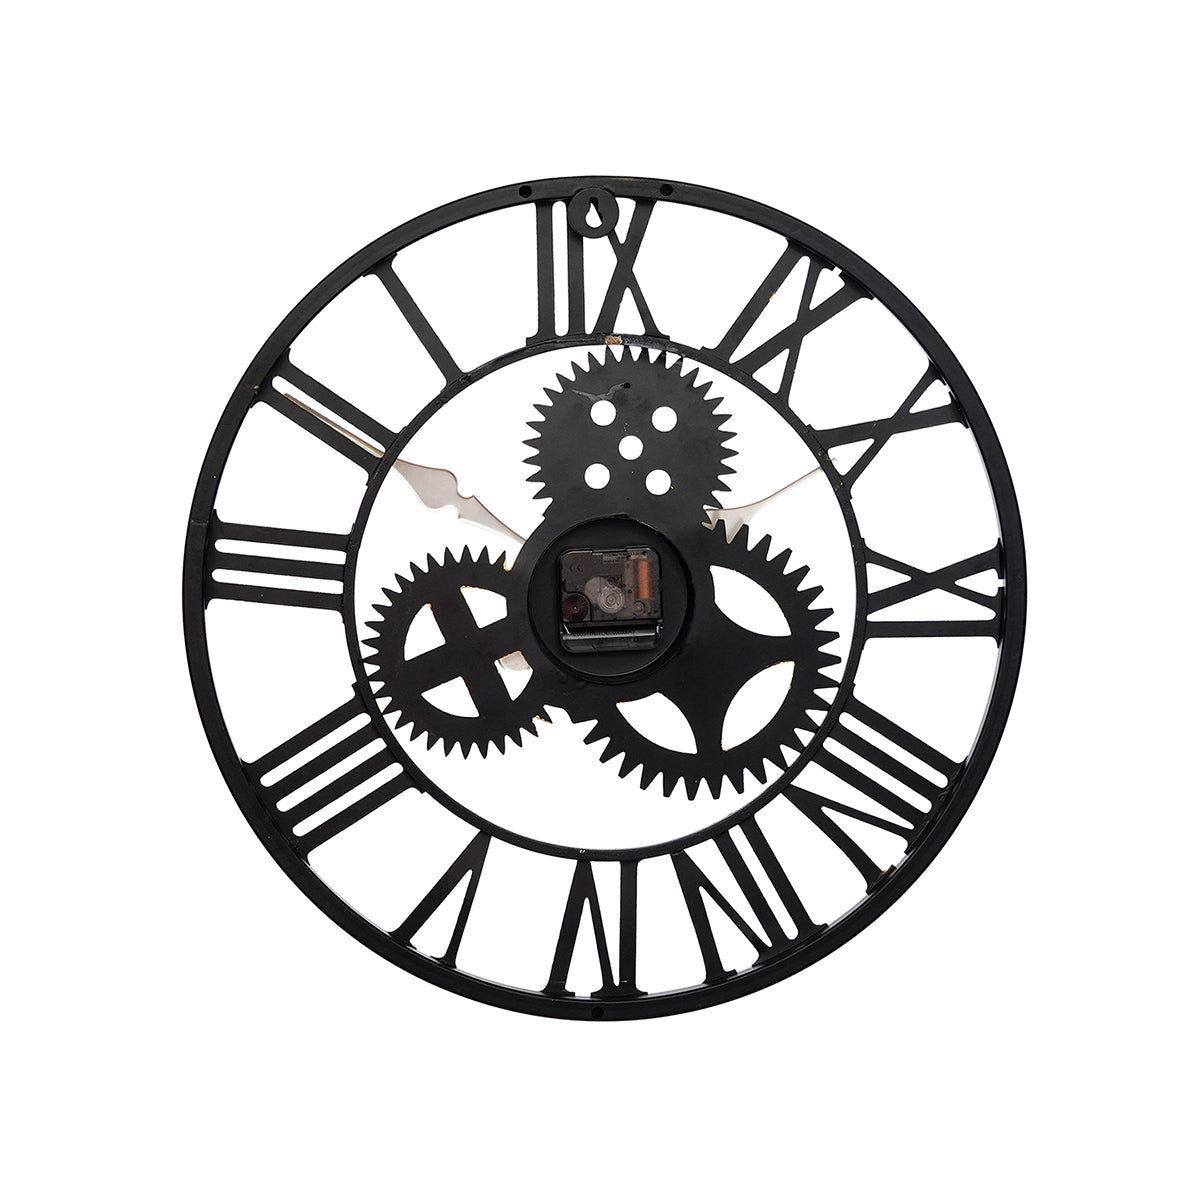 Round Black and copper Handcrafted Roman Numeral Designer Iron Wall Clock 5